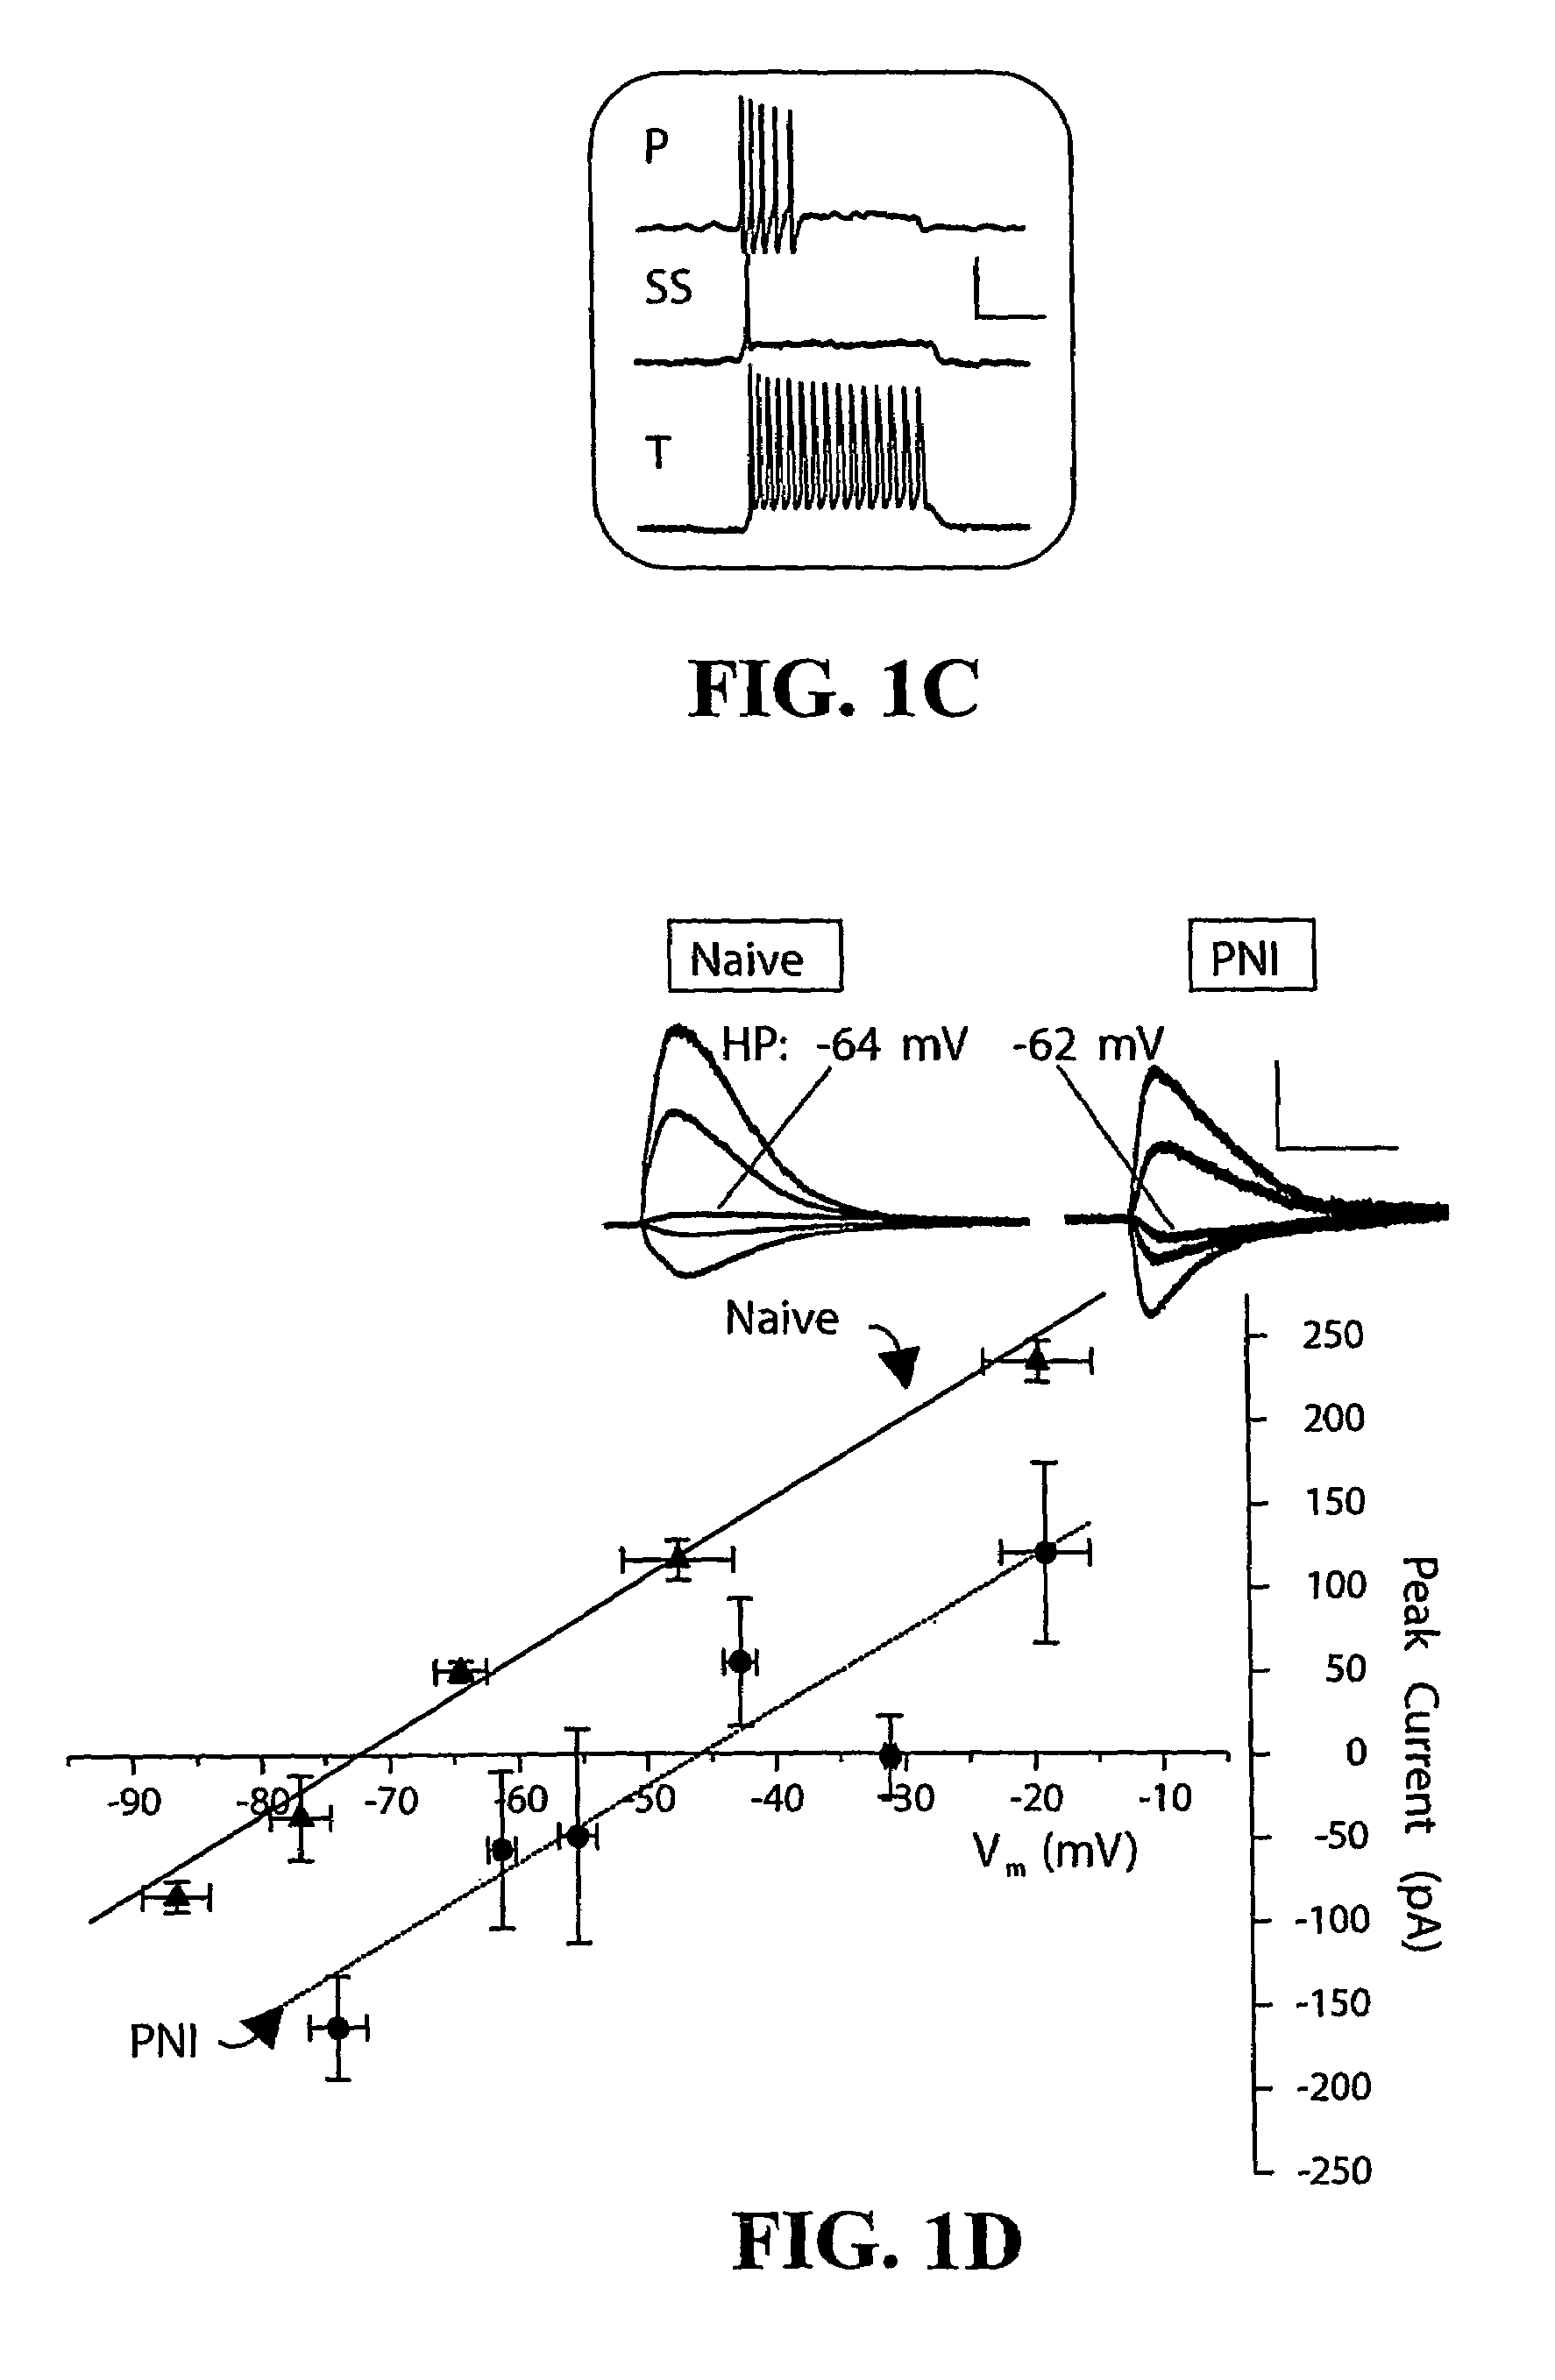 Method for identifying compounds for treatment of pain